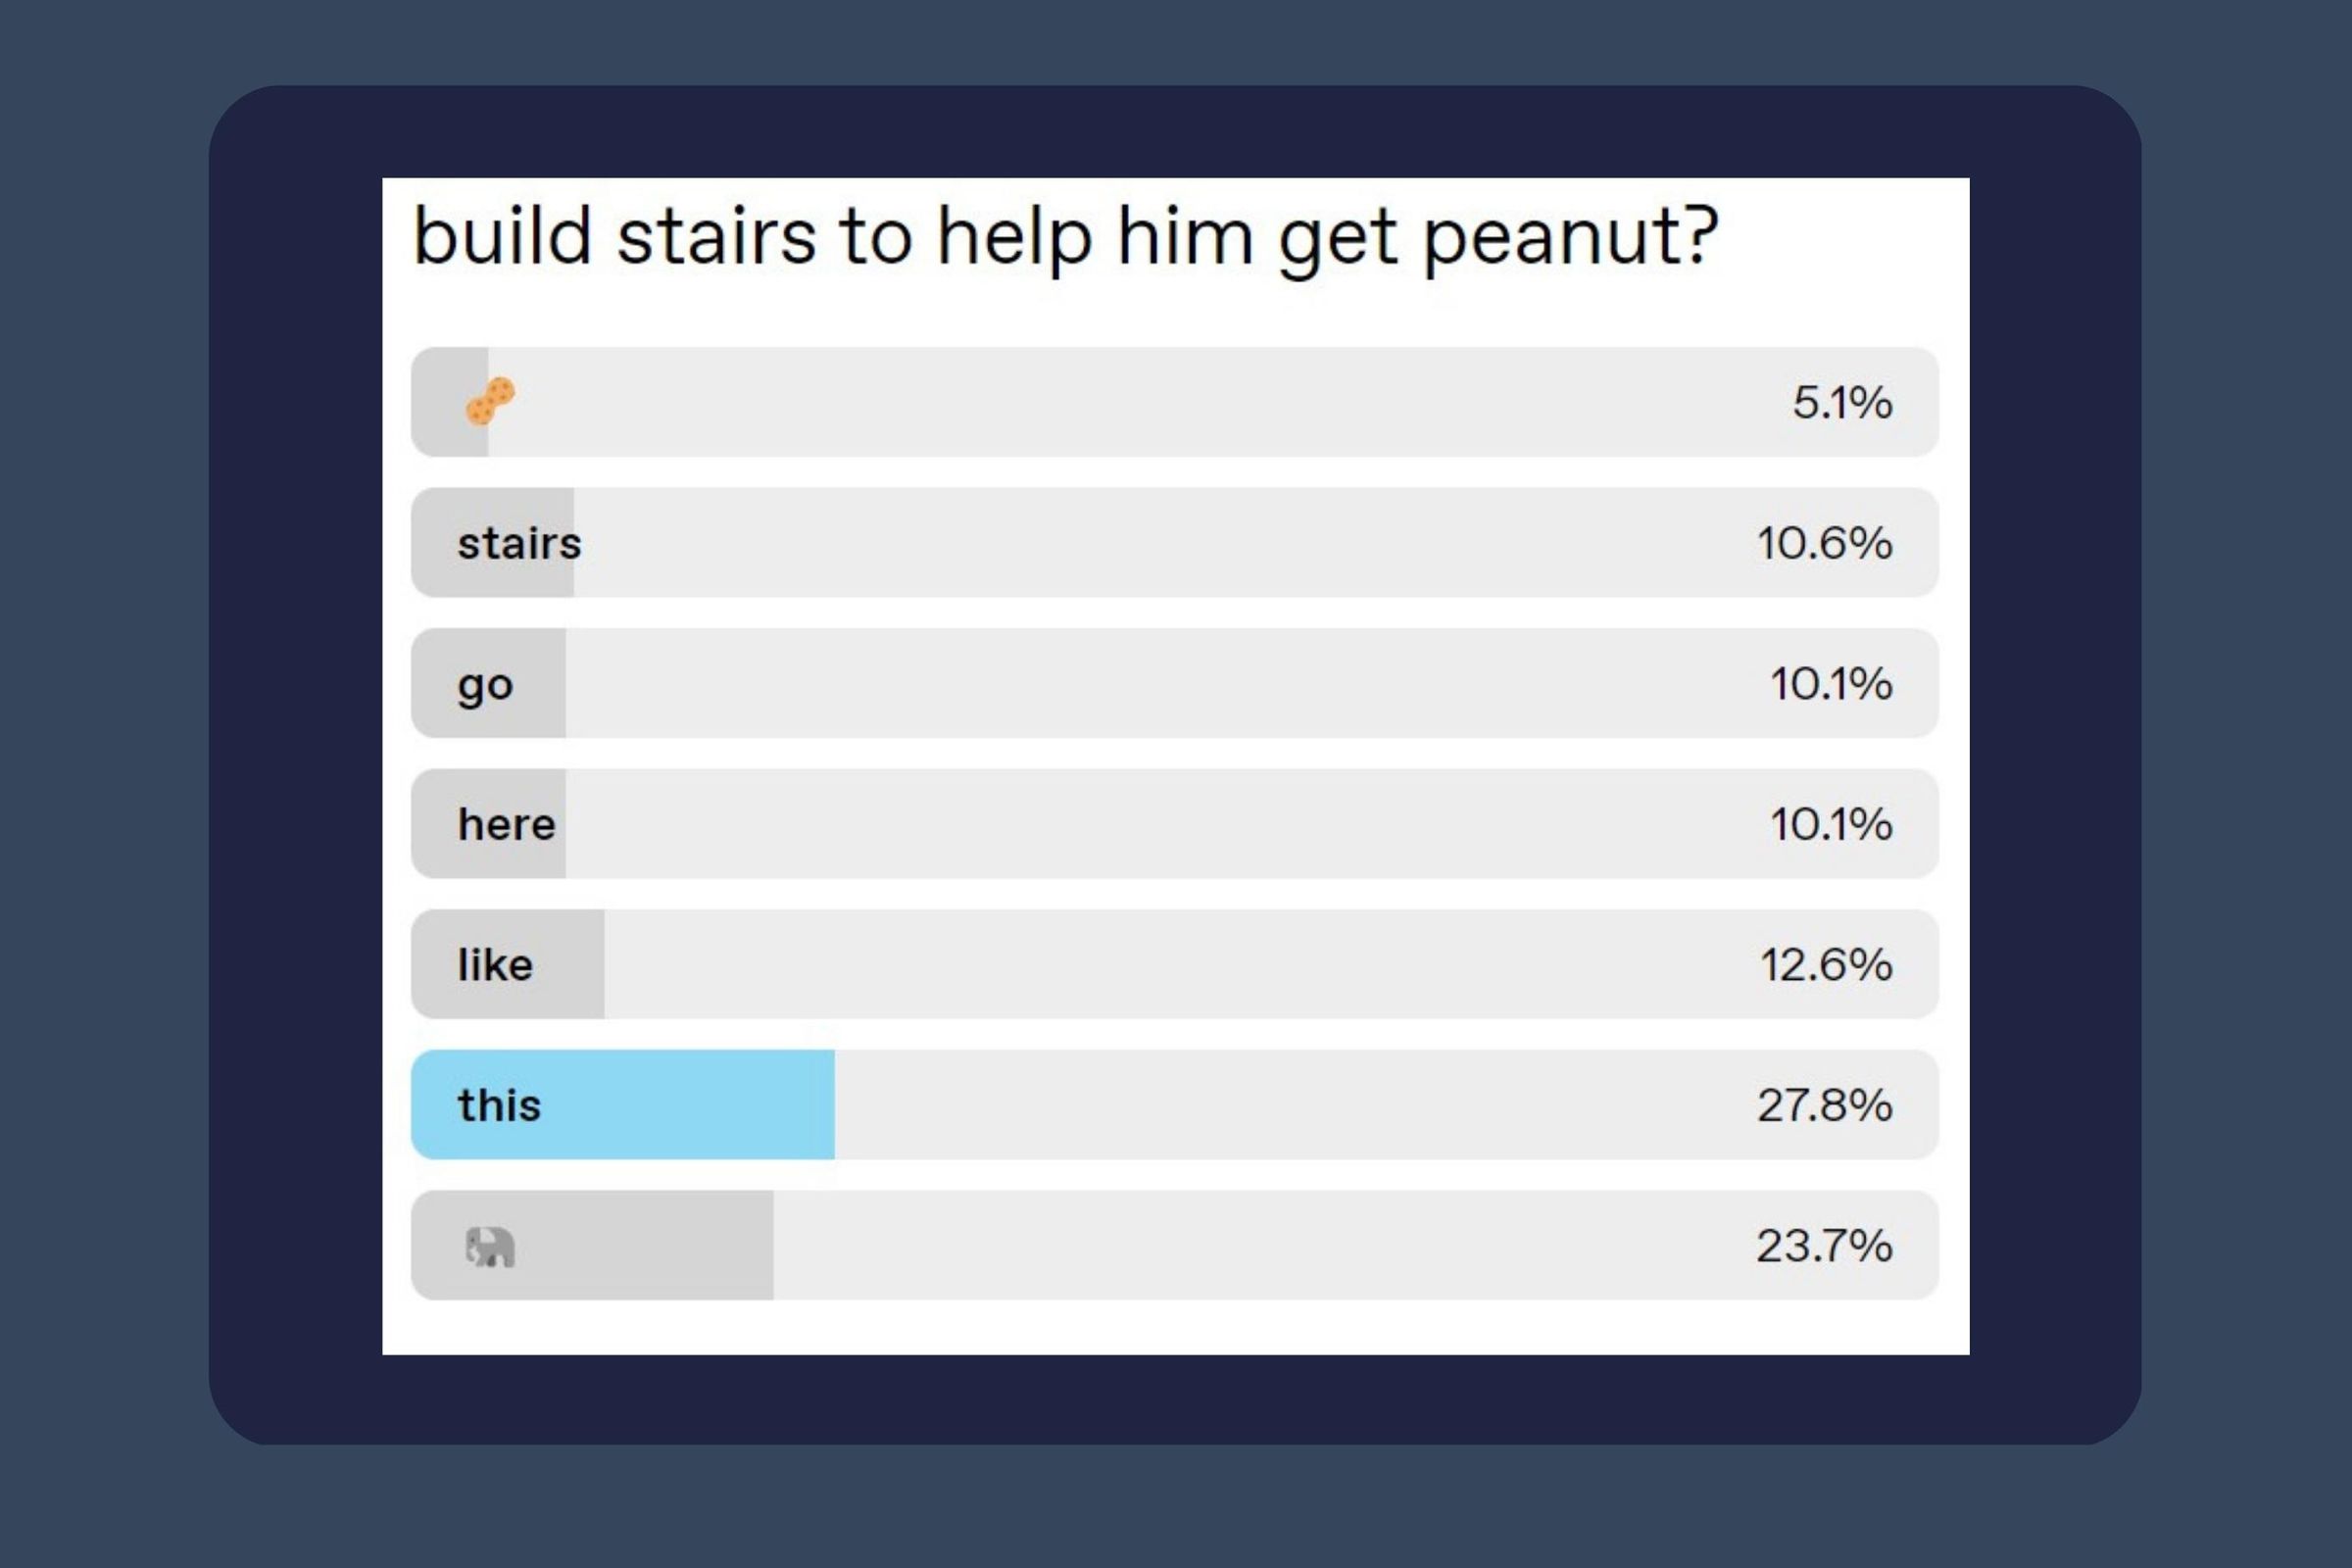 A Tumblr poll designed into a game where voters needs to build some stairs using the bar graph results to lead an elephant to a peanut.